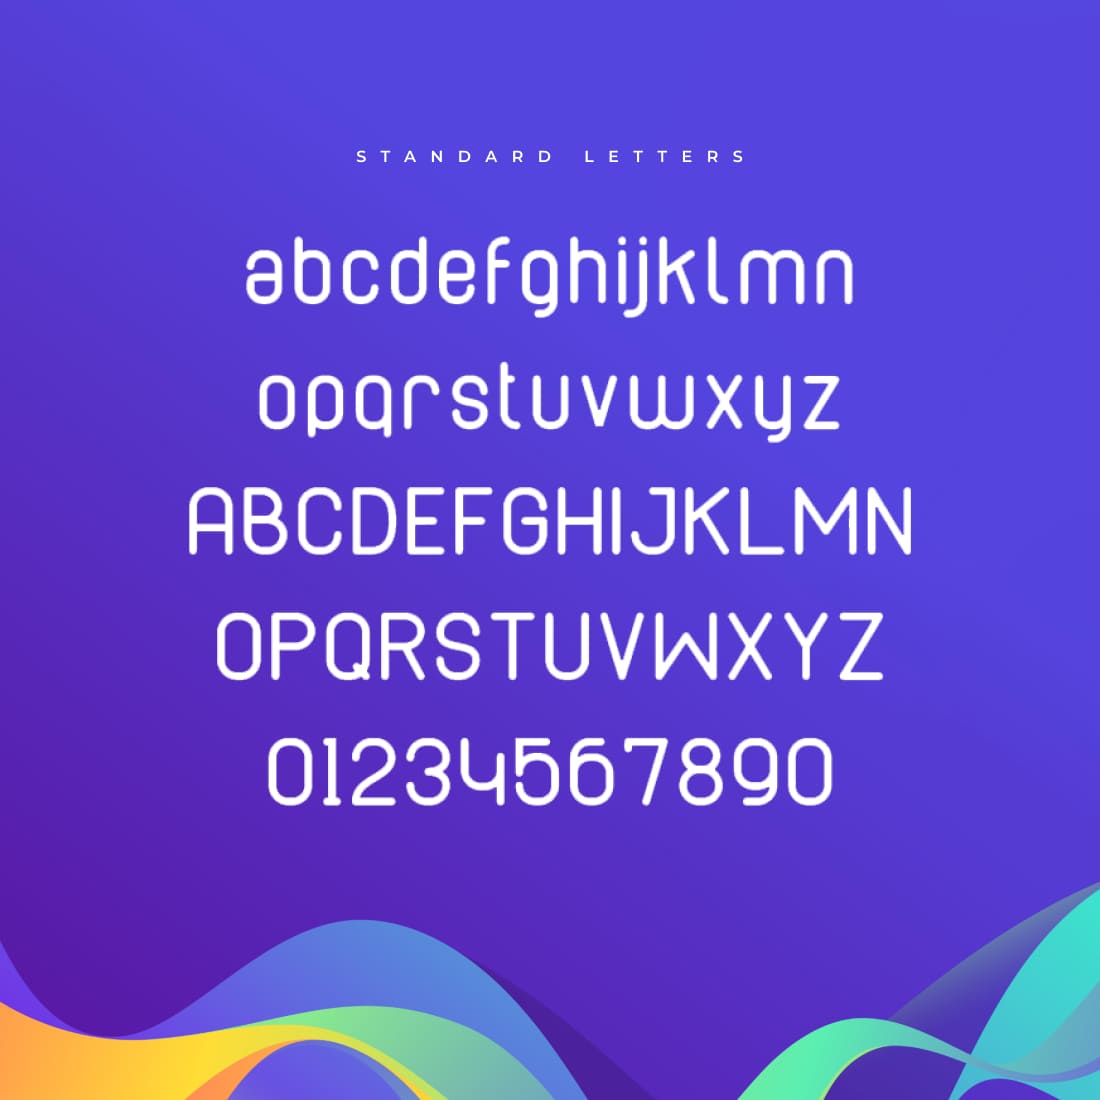 Cabo Rounded Font Family cover.